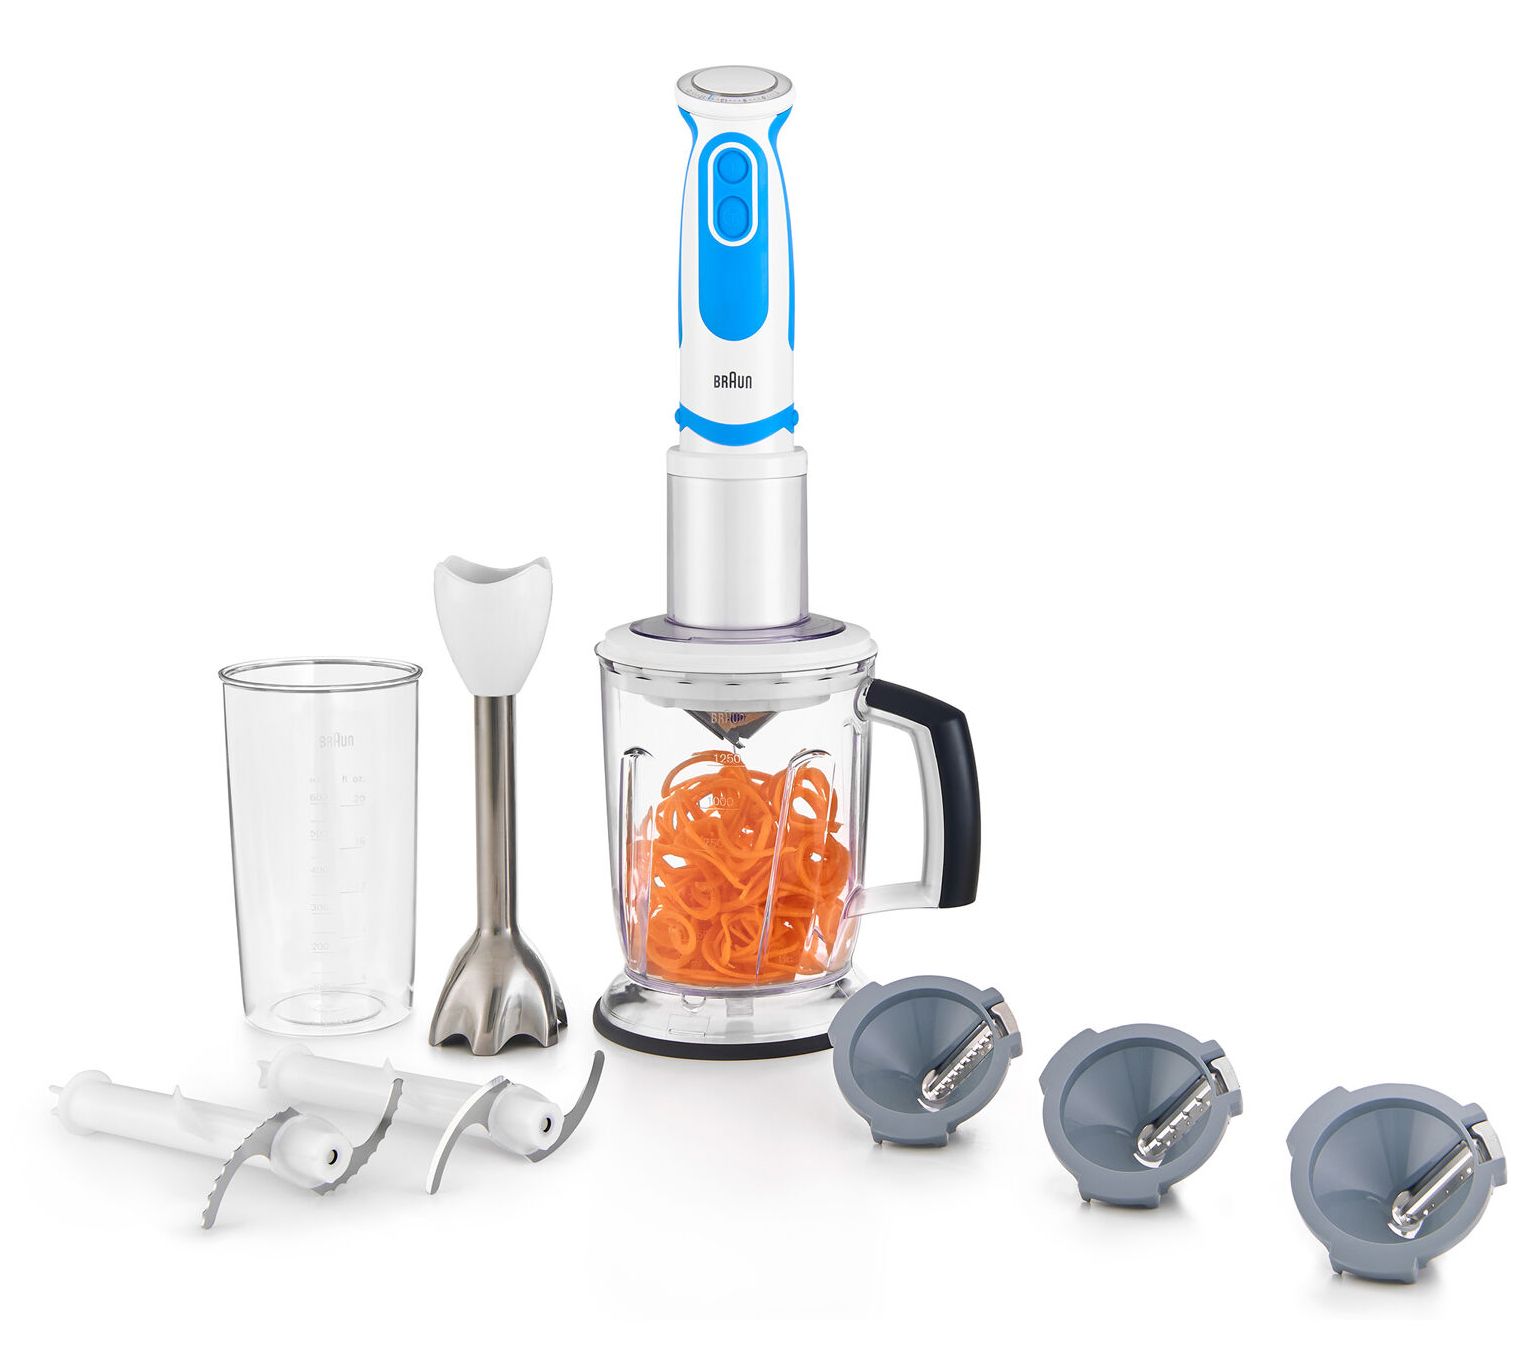 Braun MultiQuick 7 Smart-Speed Hand Blender with 6-Cup Food